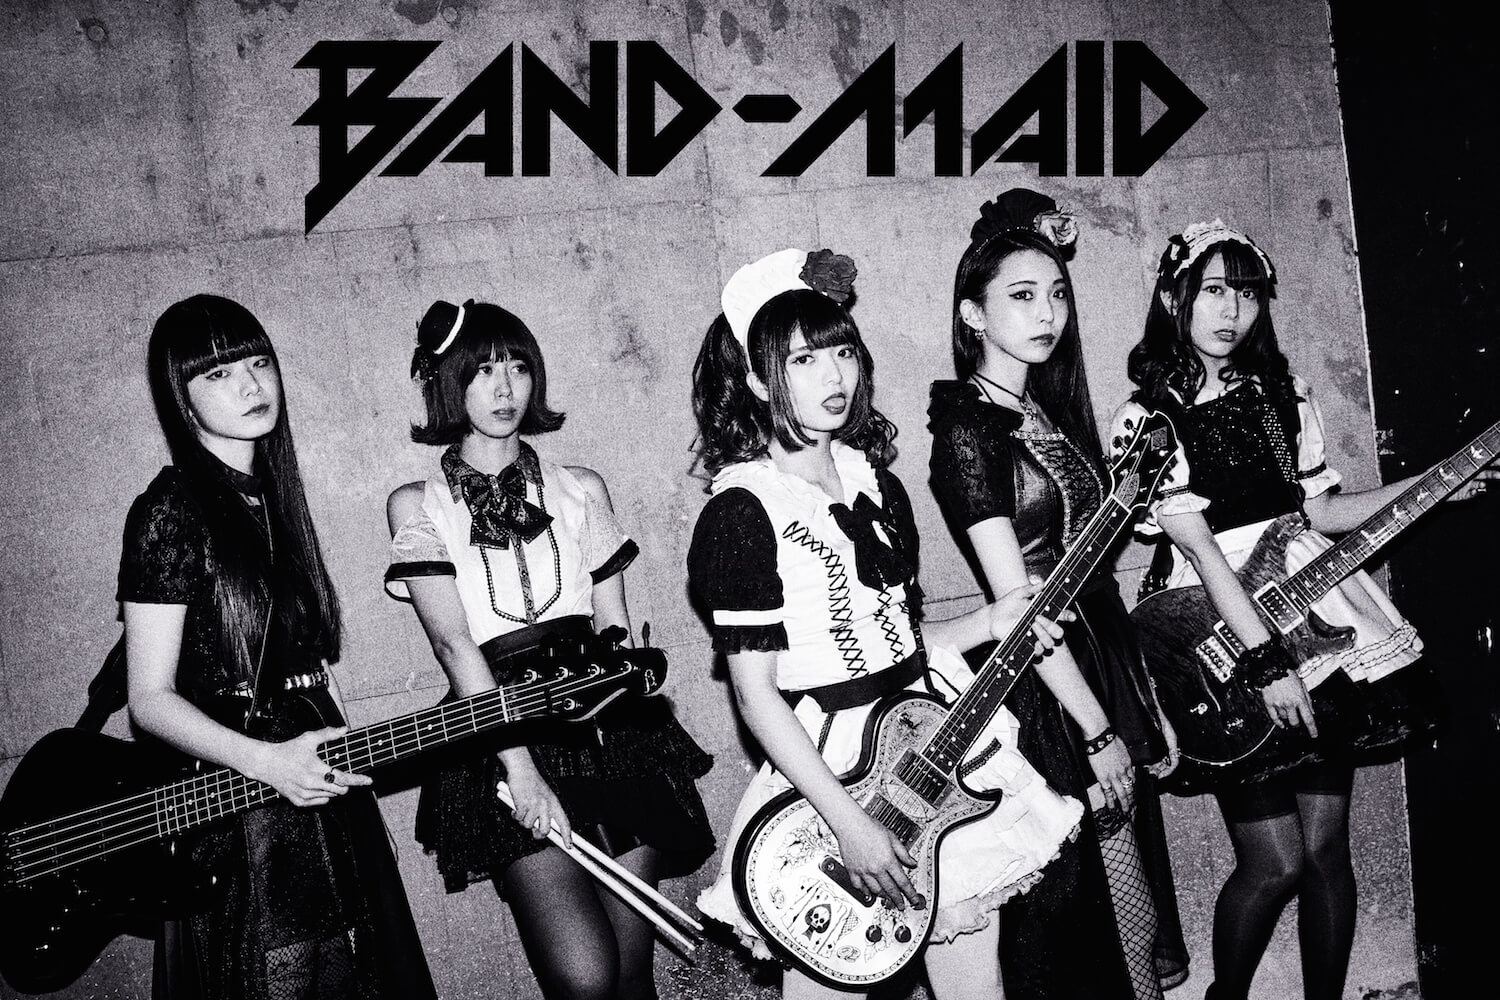 Concert Review: BAND-MAID's Overwhelming Performance on Day 1 of 